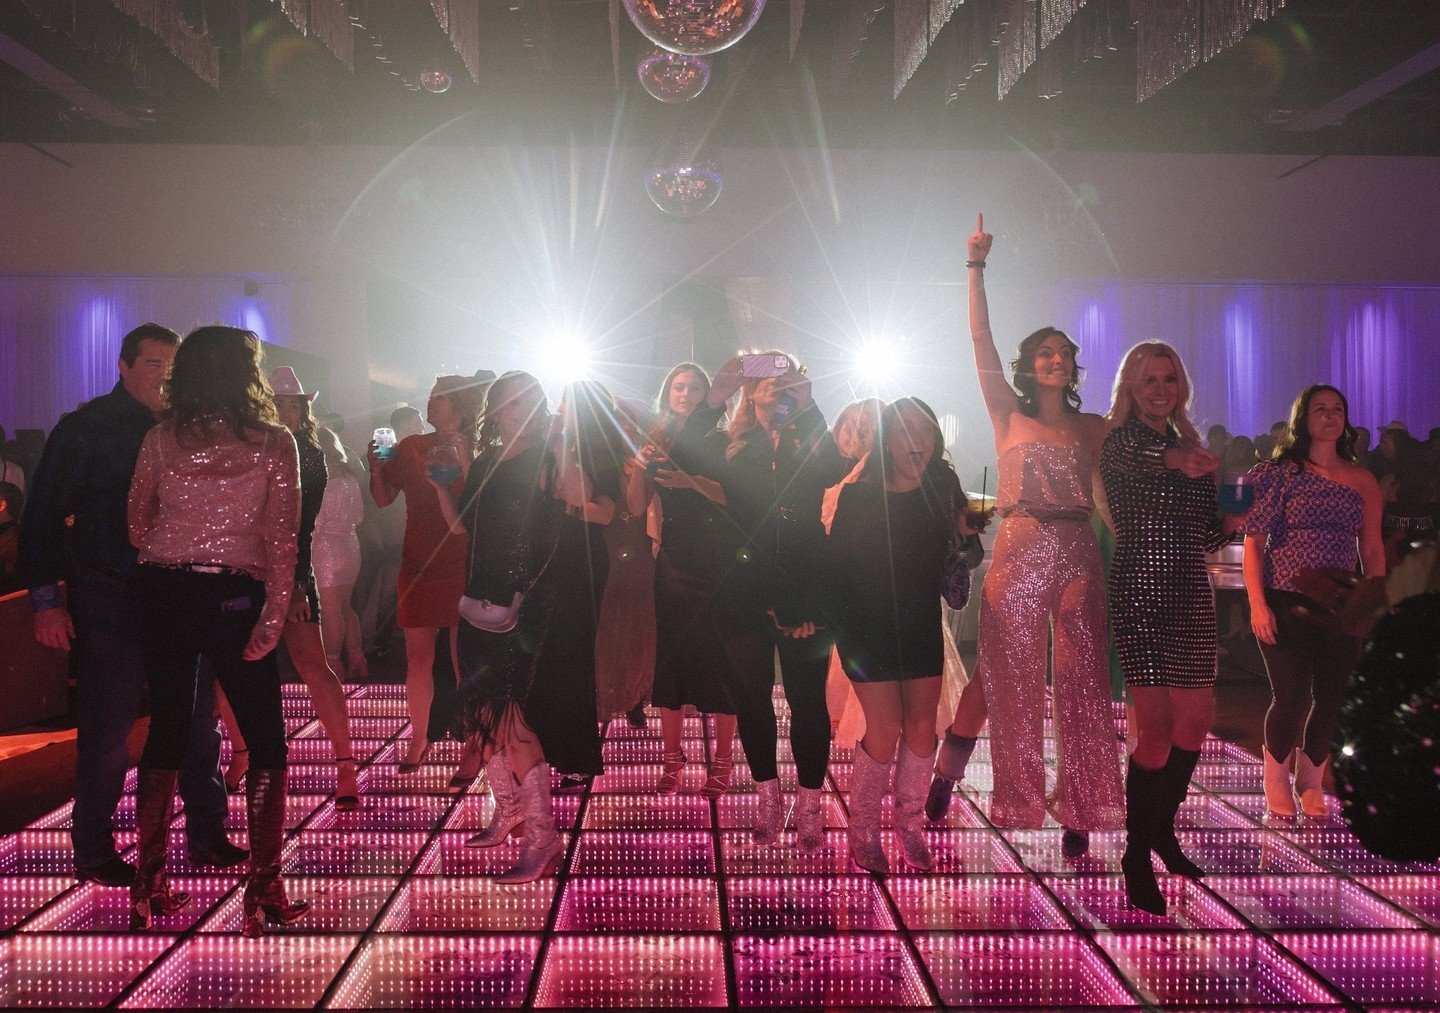 Disco fever 🕺⁠
⁠
Discover the possibilities of your event at our venue when you book with us today.✨⁠
⁠
Photography | @haverleephotography⁠
Planning, design, production &amp; coordination | @402events